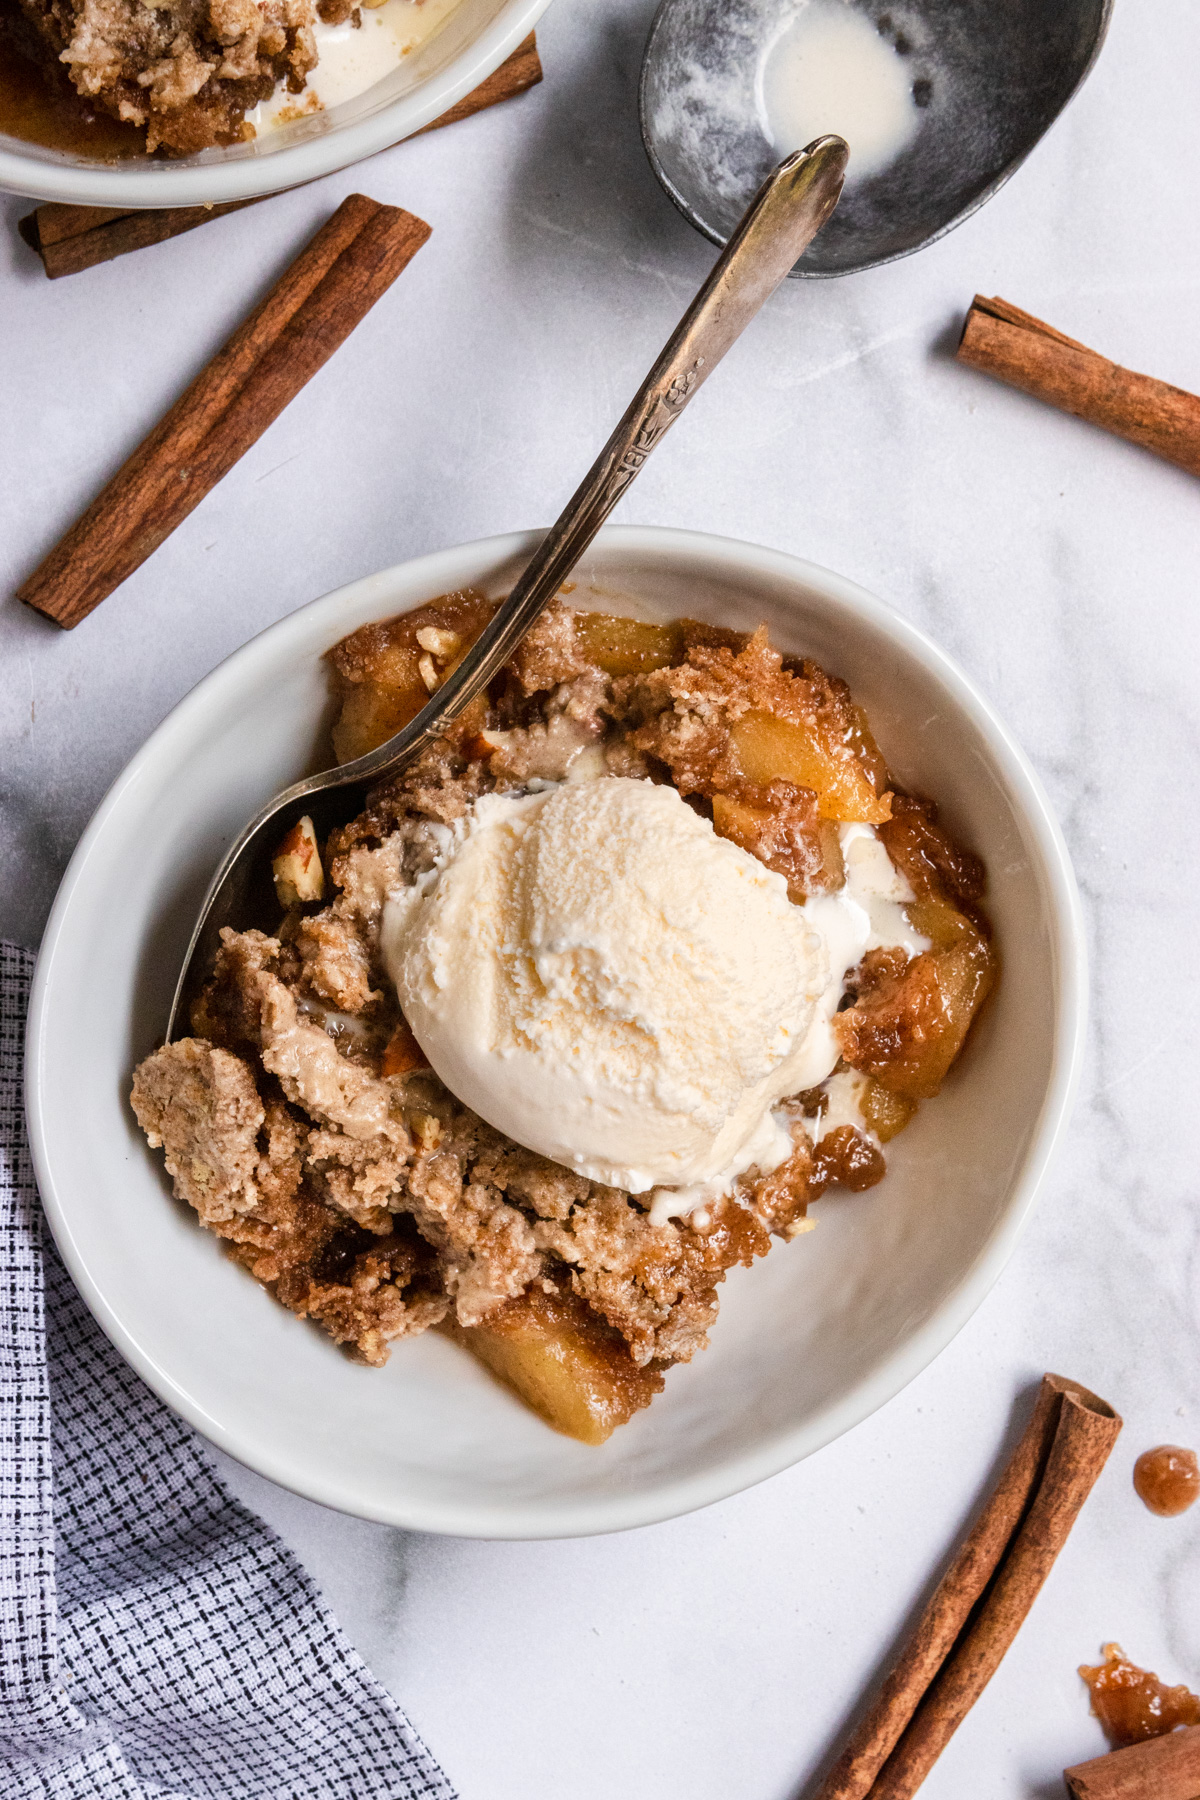 Overhead shot of apple dump cake with ice cream and spoon.